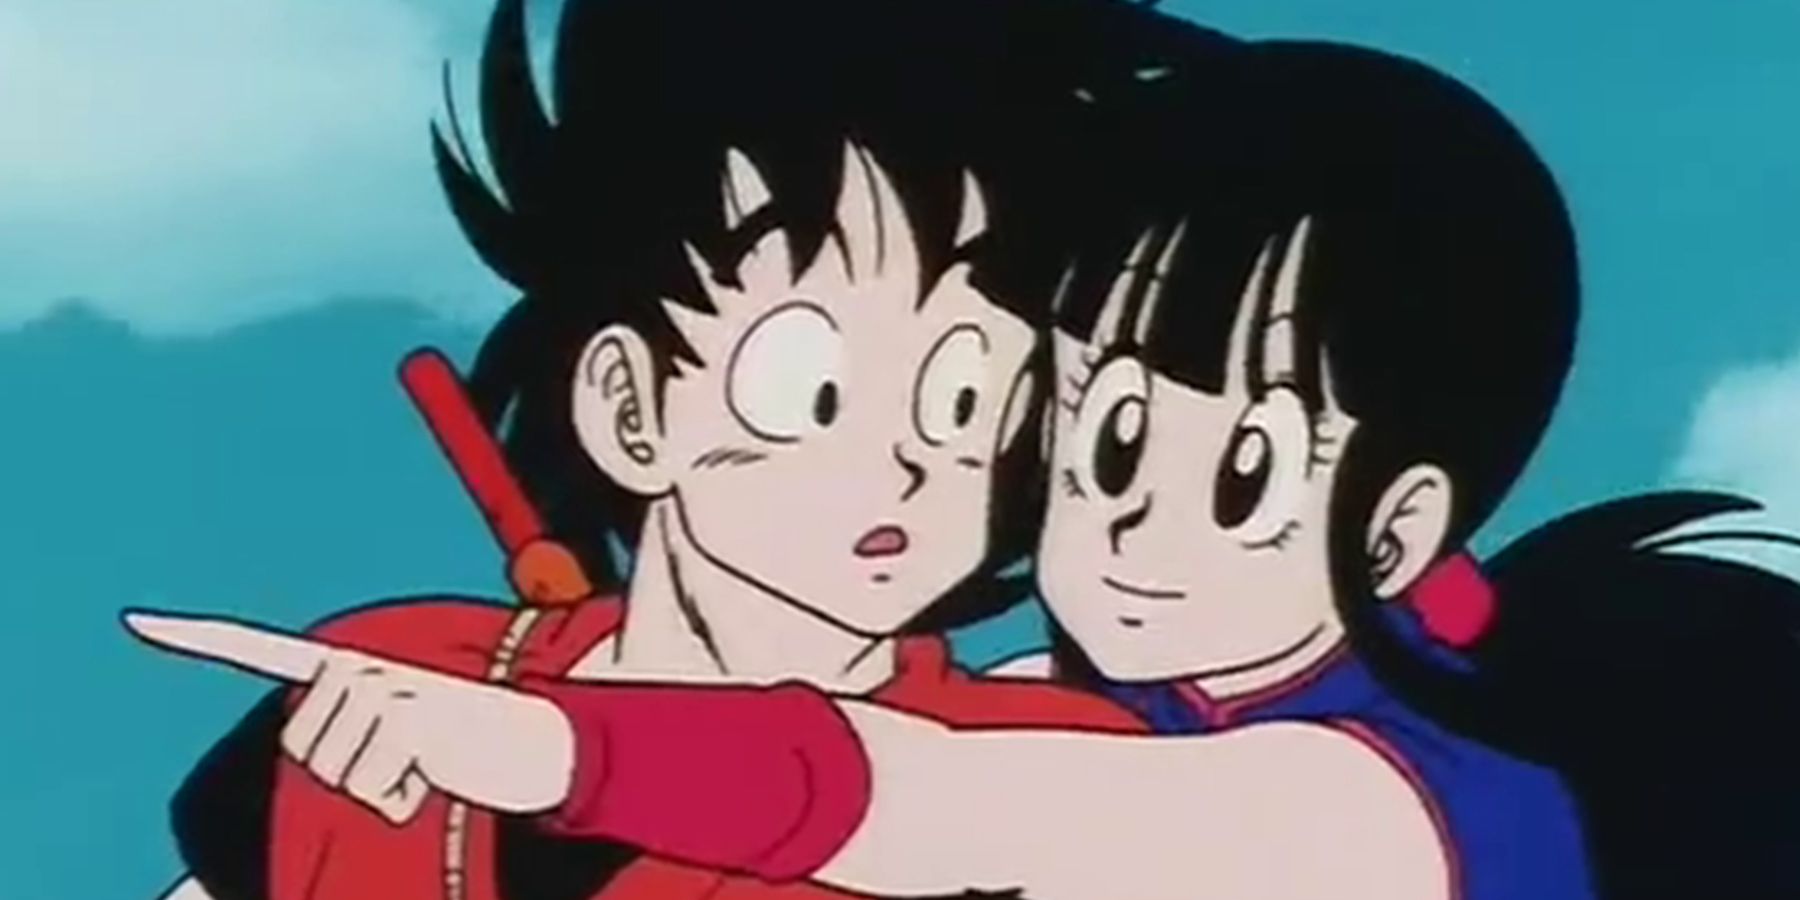 Goku and Chi-Chi in an early episode of Dragon Ball.